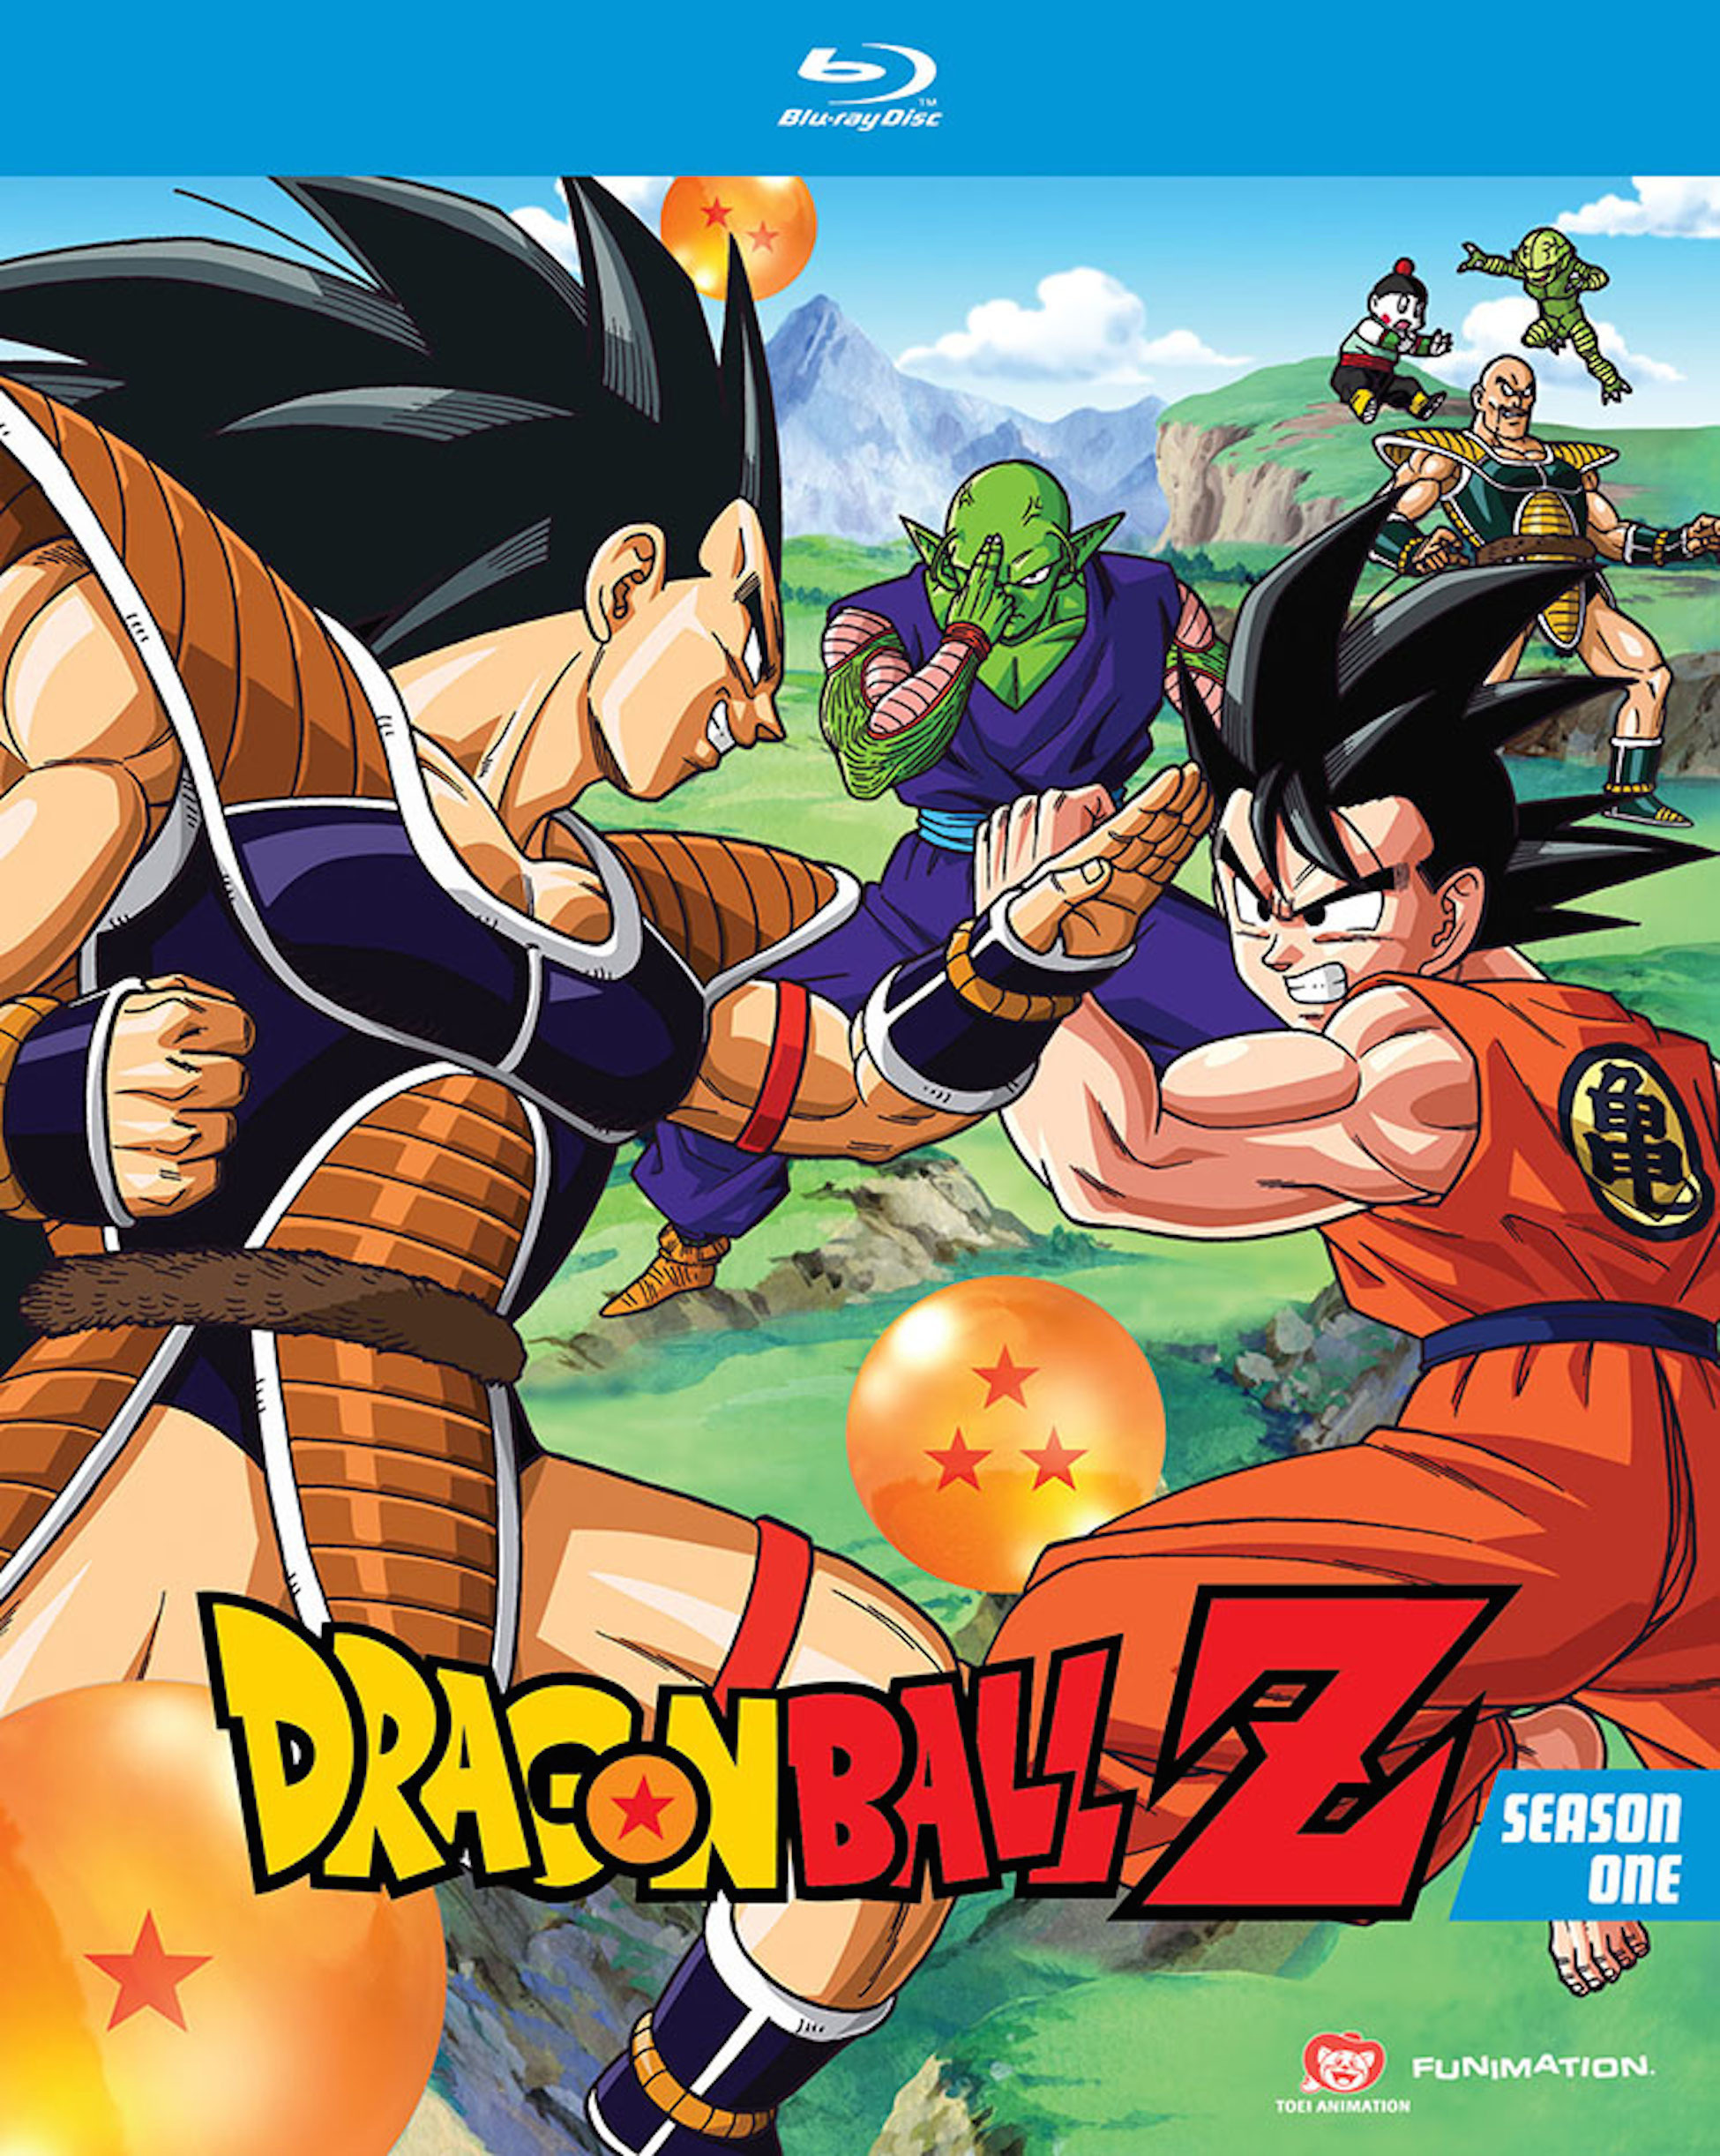 the newest dragon ball z series